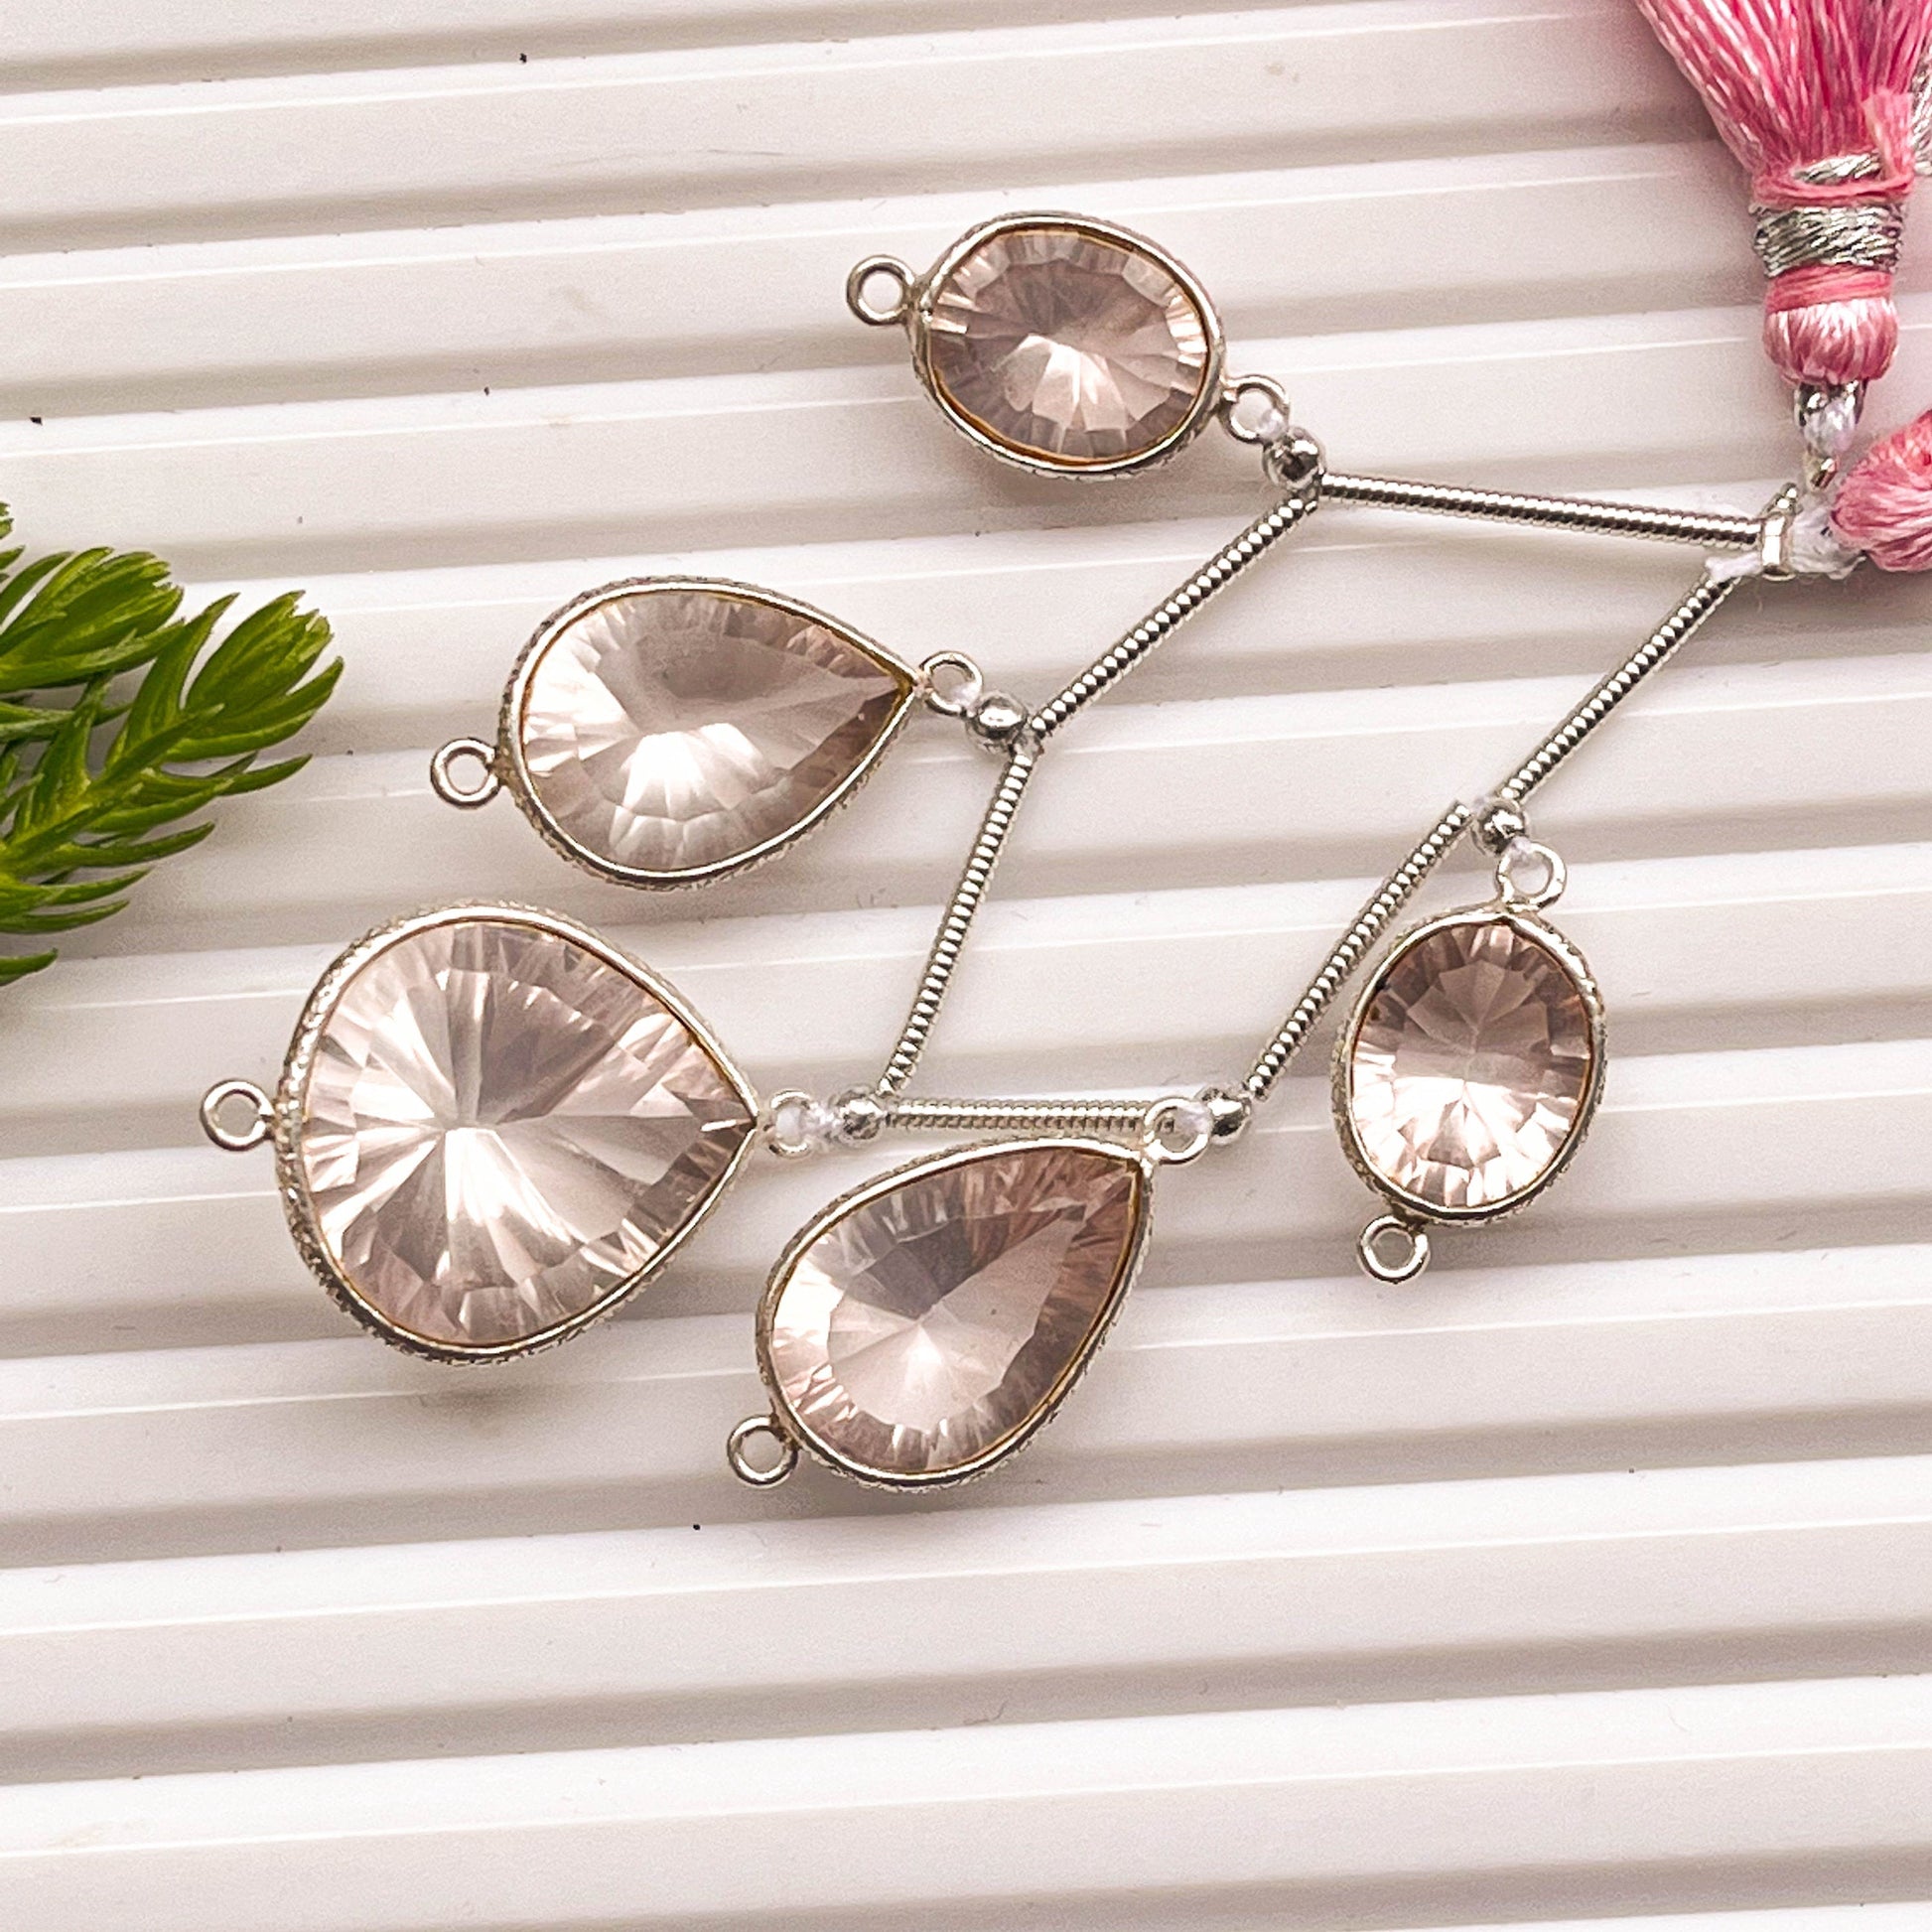 5 Pieces Rose Quartz Concave Cut stone Mix Shape 925 Silver bezel set Connectors for Jewelry making Beadsforyourjewelry